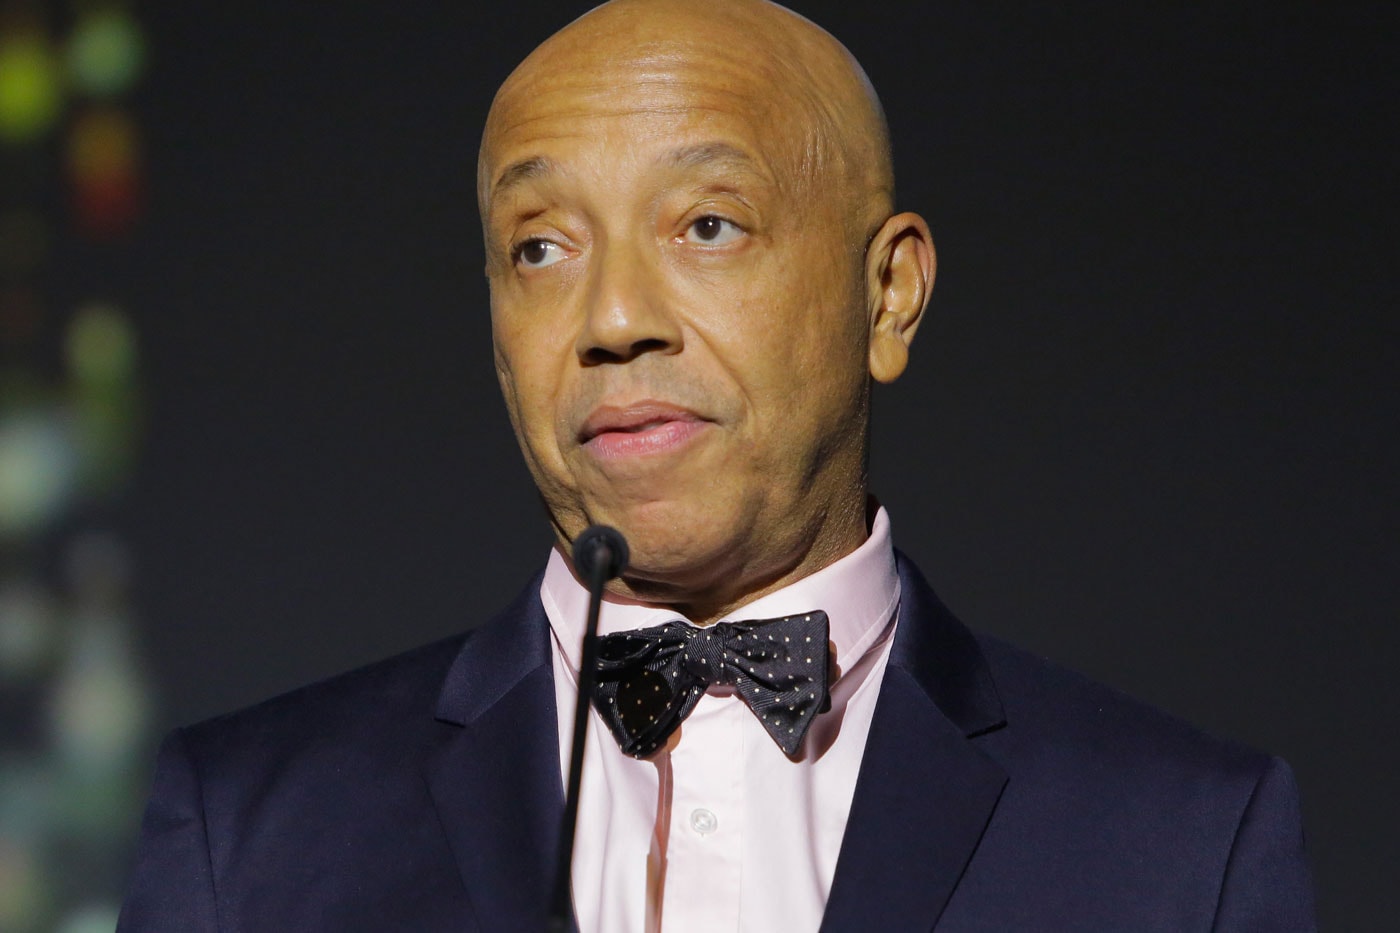 Russell Simmons Tells Donald Trump to "Stop the Bullsh*t" in Open Letter